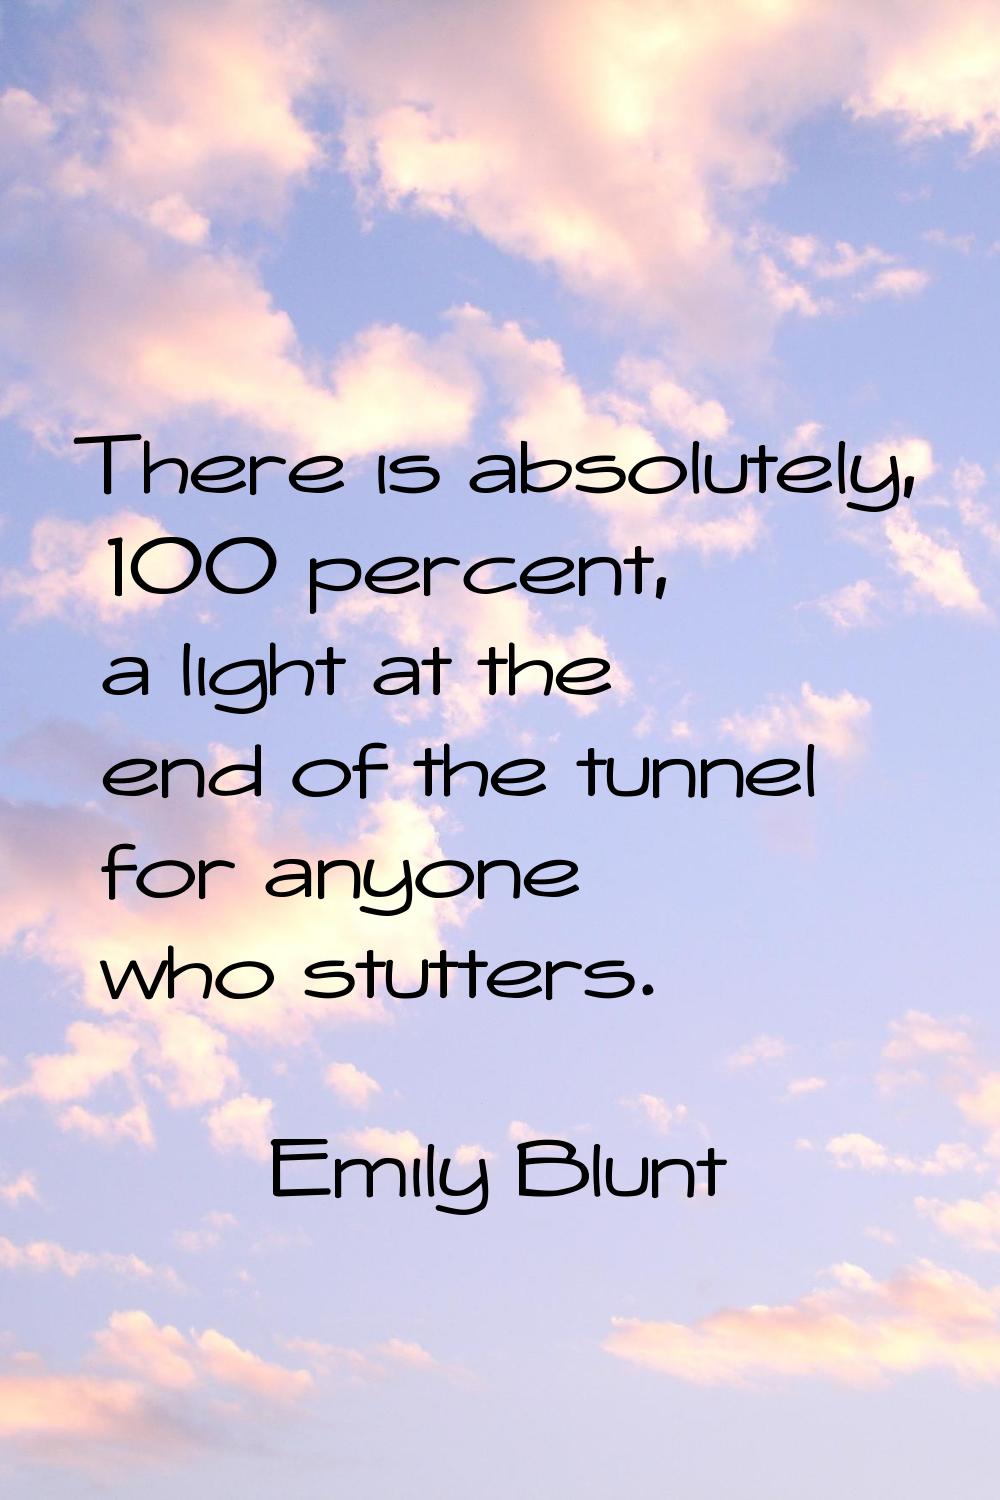 There is absolutely, 100 percent, a light at the end of the tunnel for anyone who stutters.